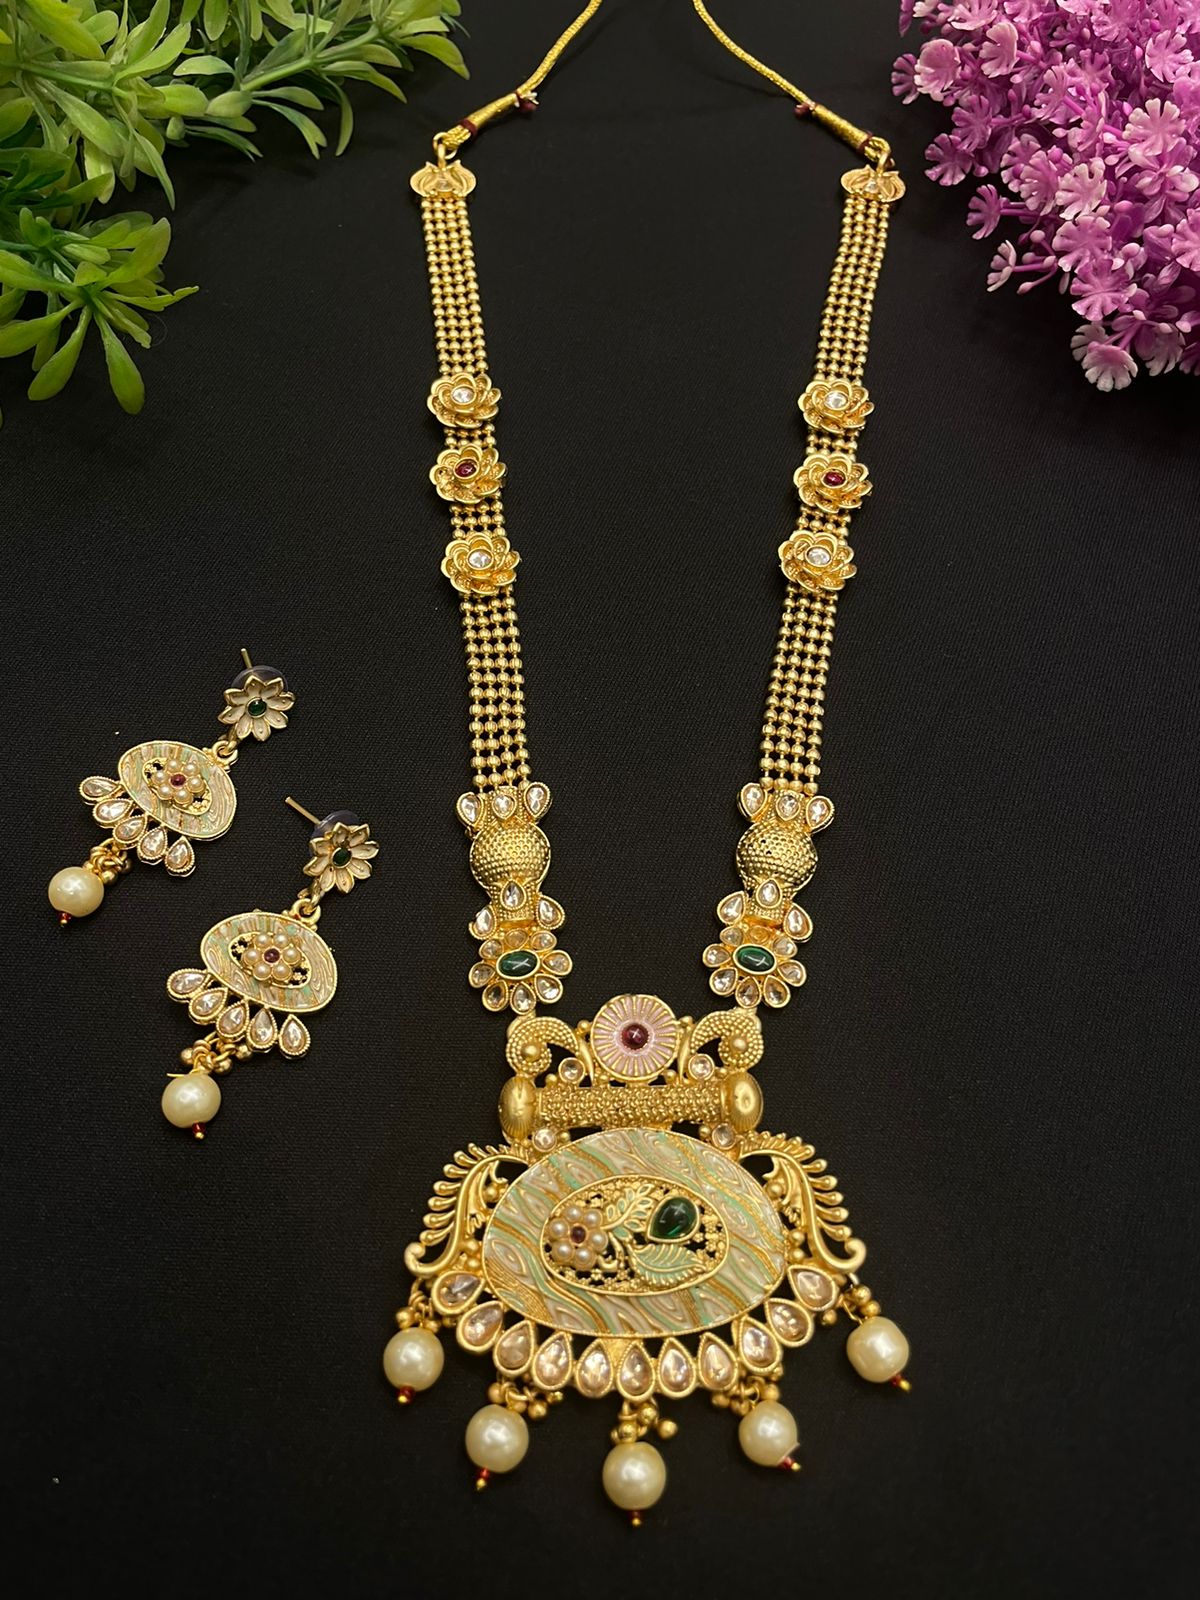 Elevate your style with our Antique Jewelry Long Necklace Set.